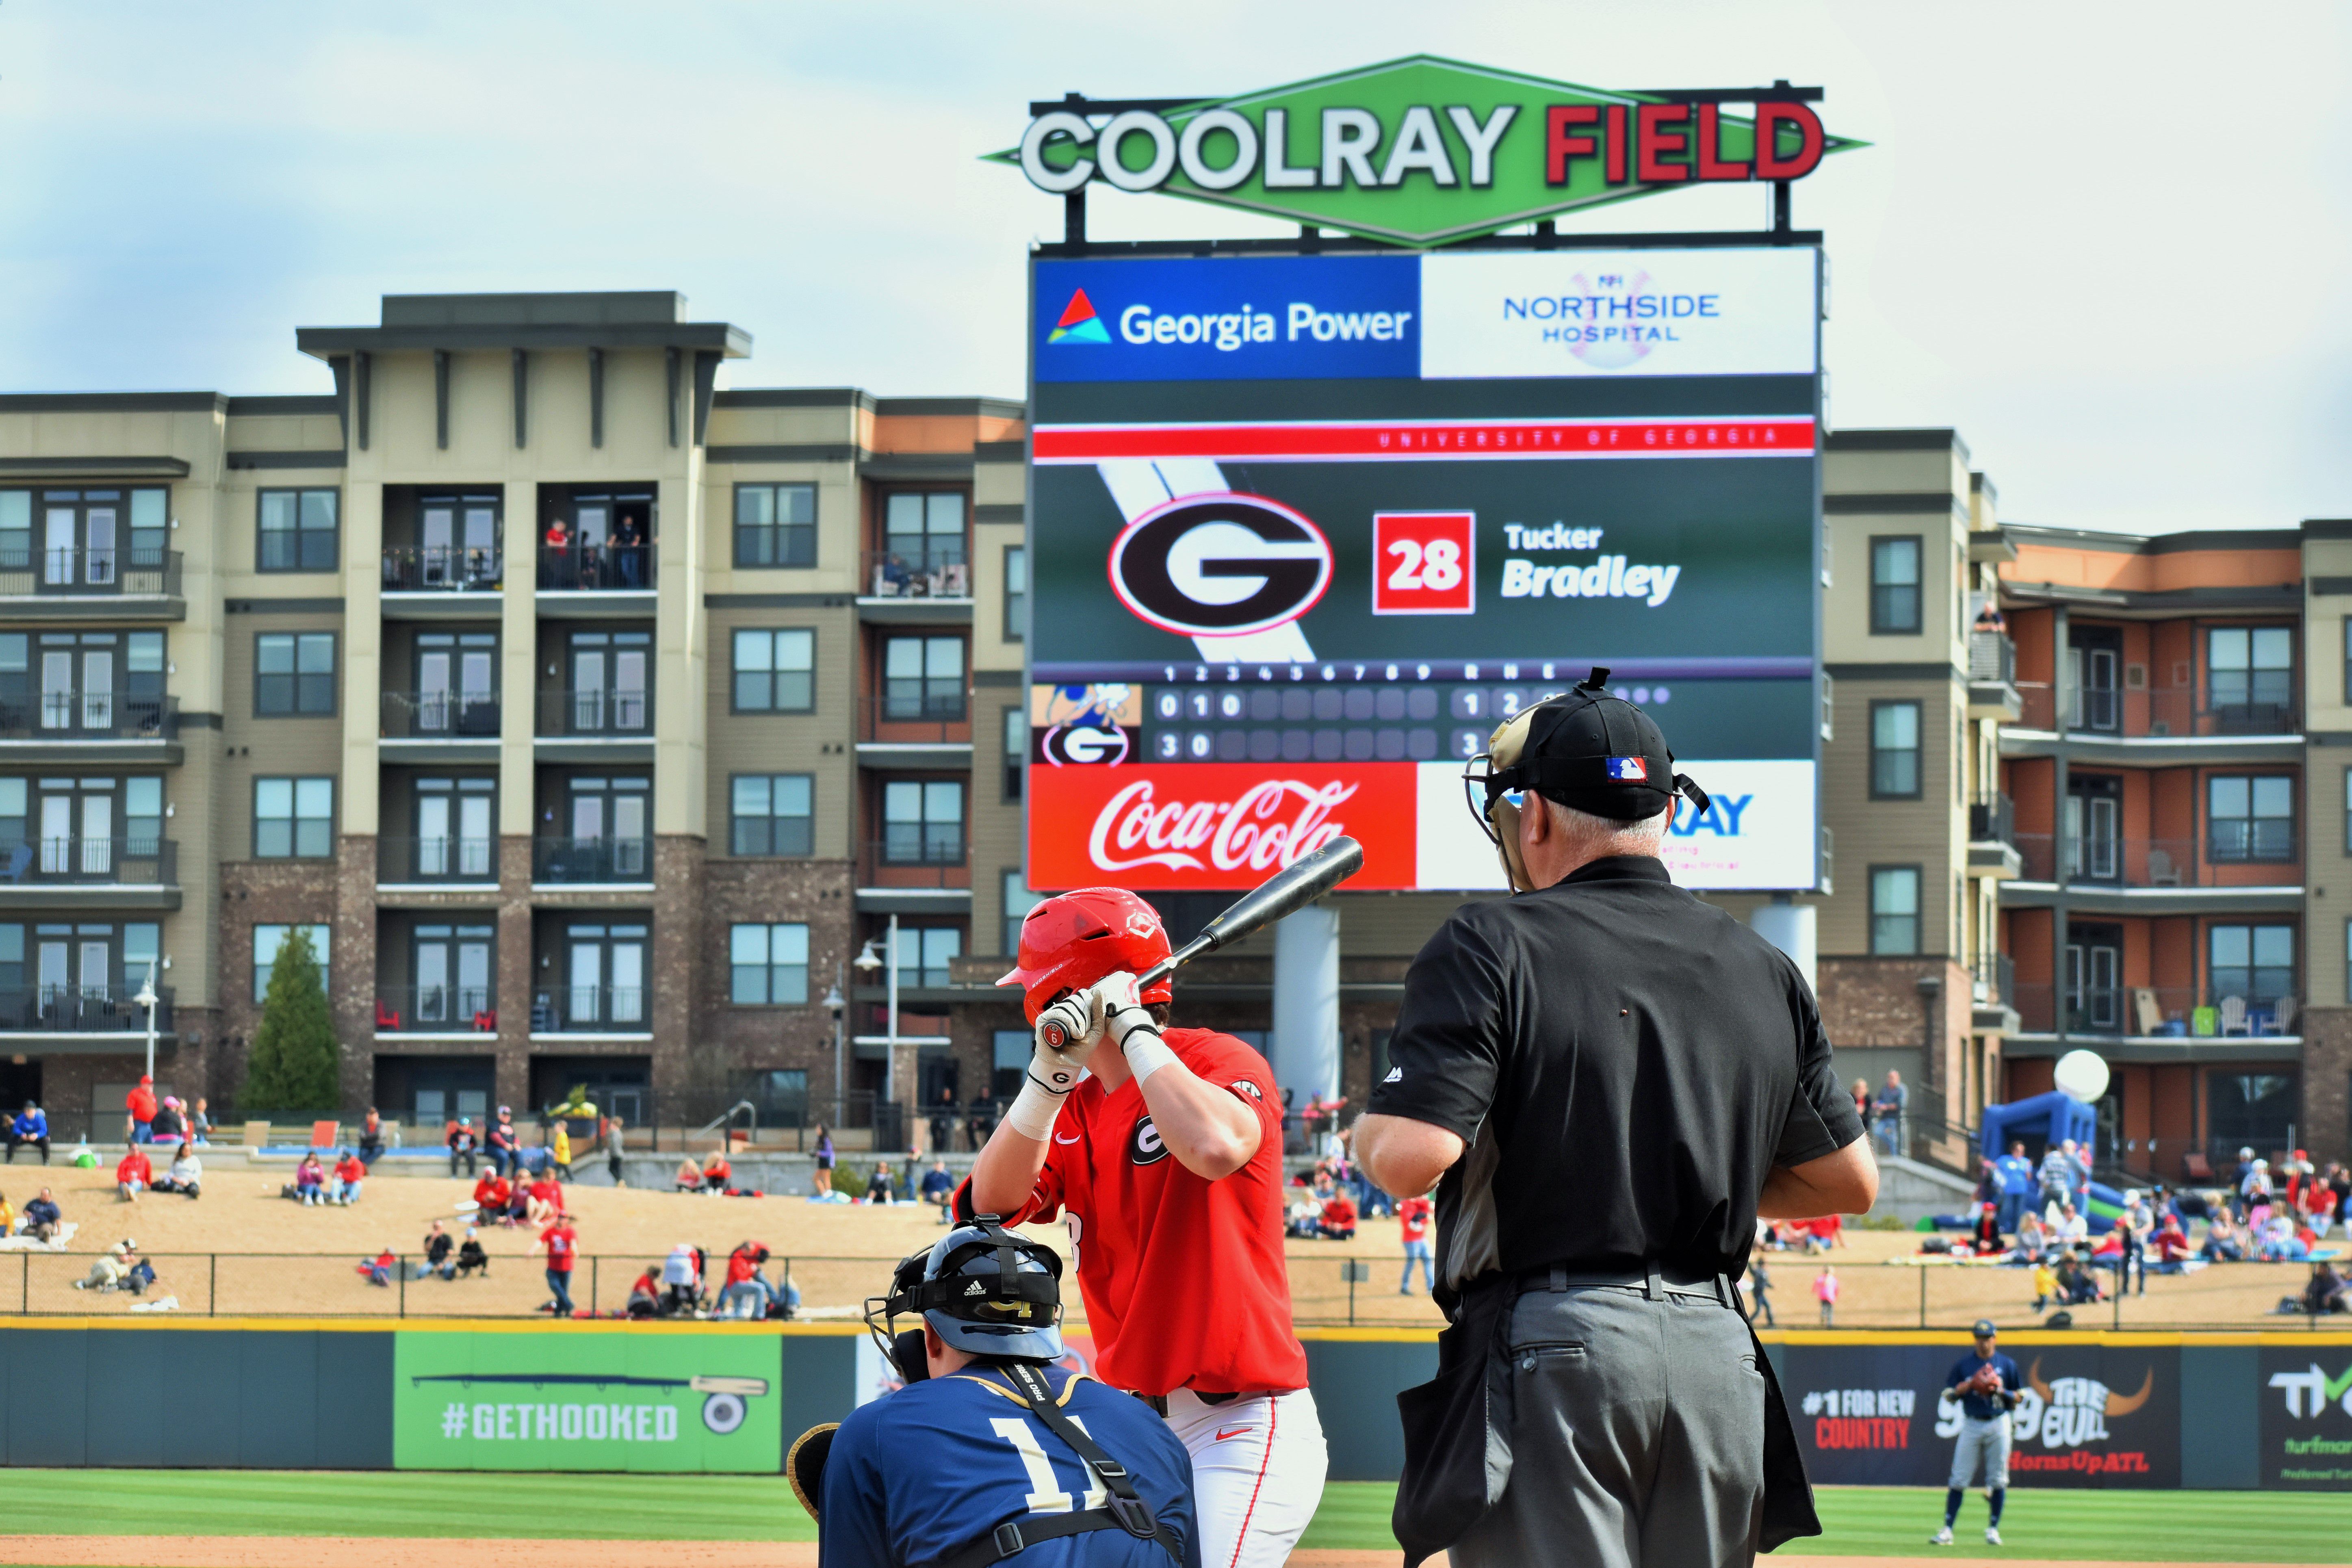 Coolray Field is a great place to watch a ballgame!! - Review of